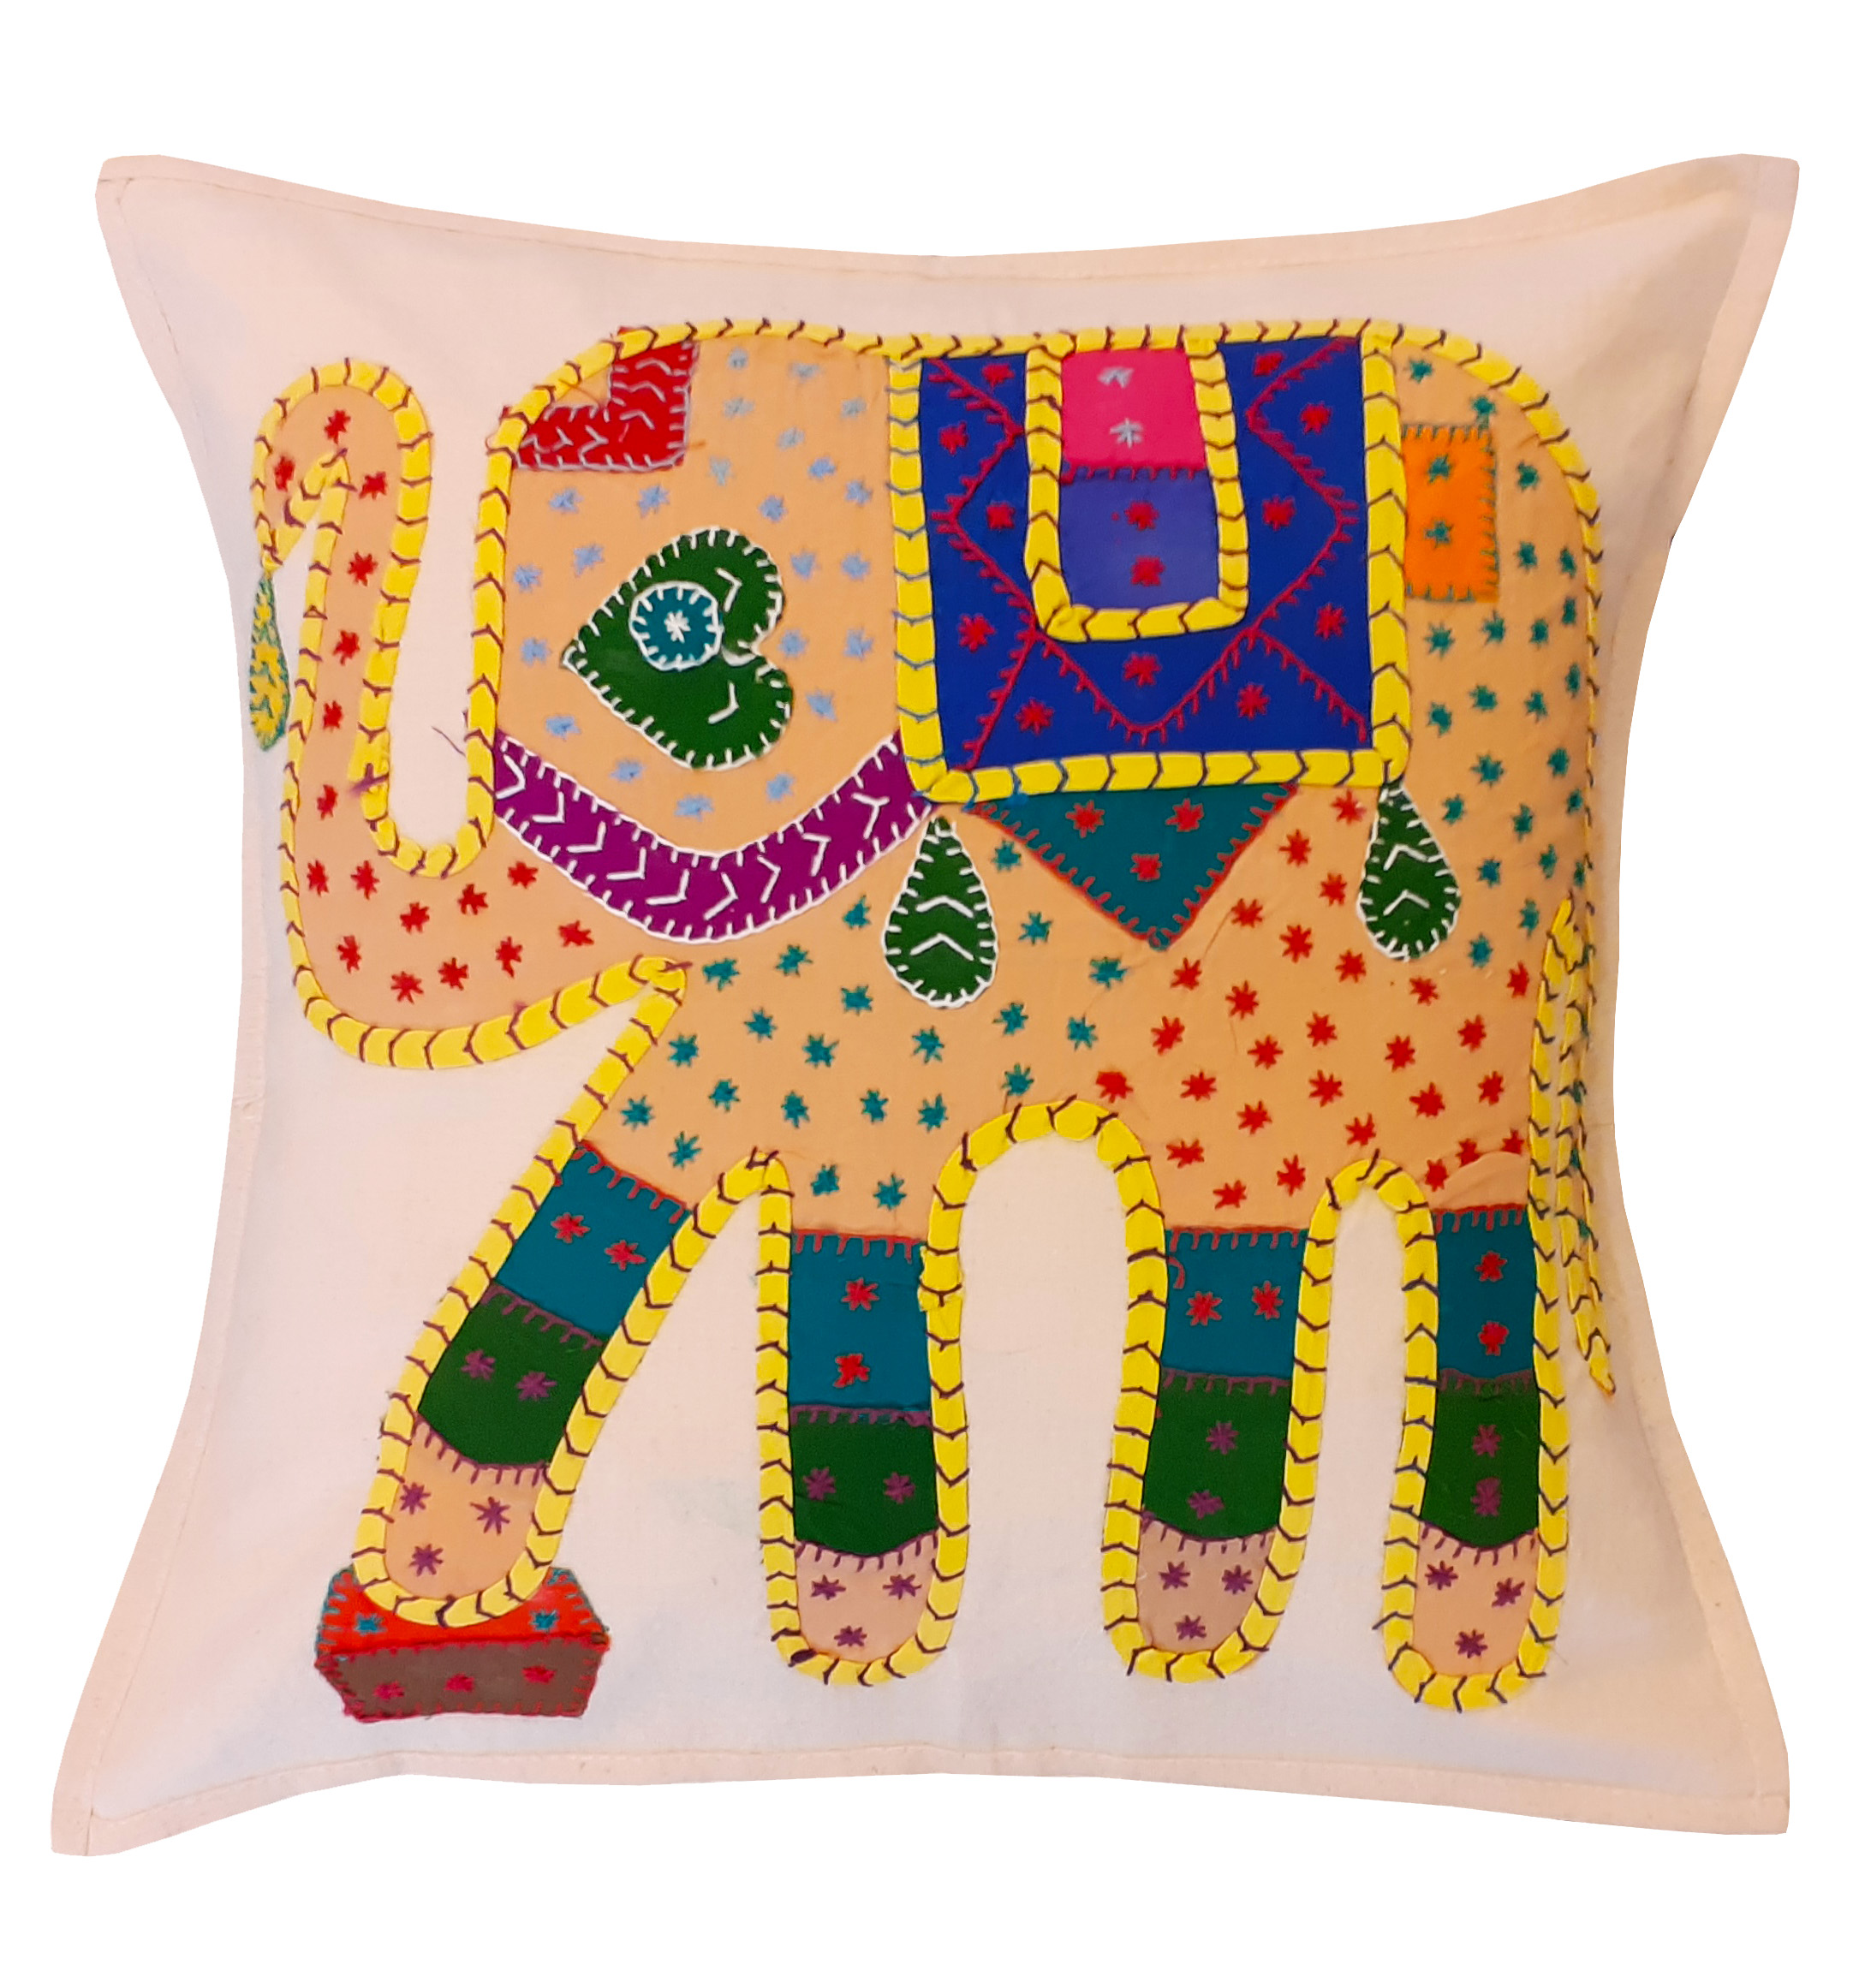 Applique Work Handmade Cushion Covers -Set of 2 - Cushions & Covers ...